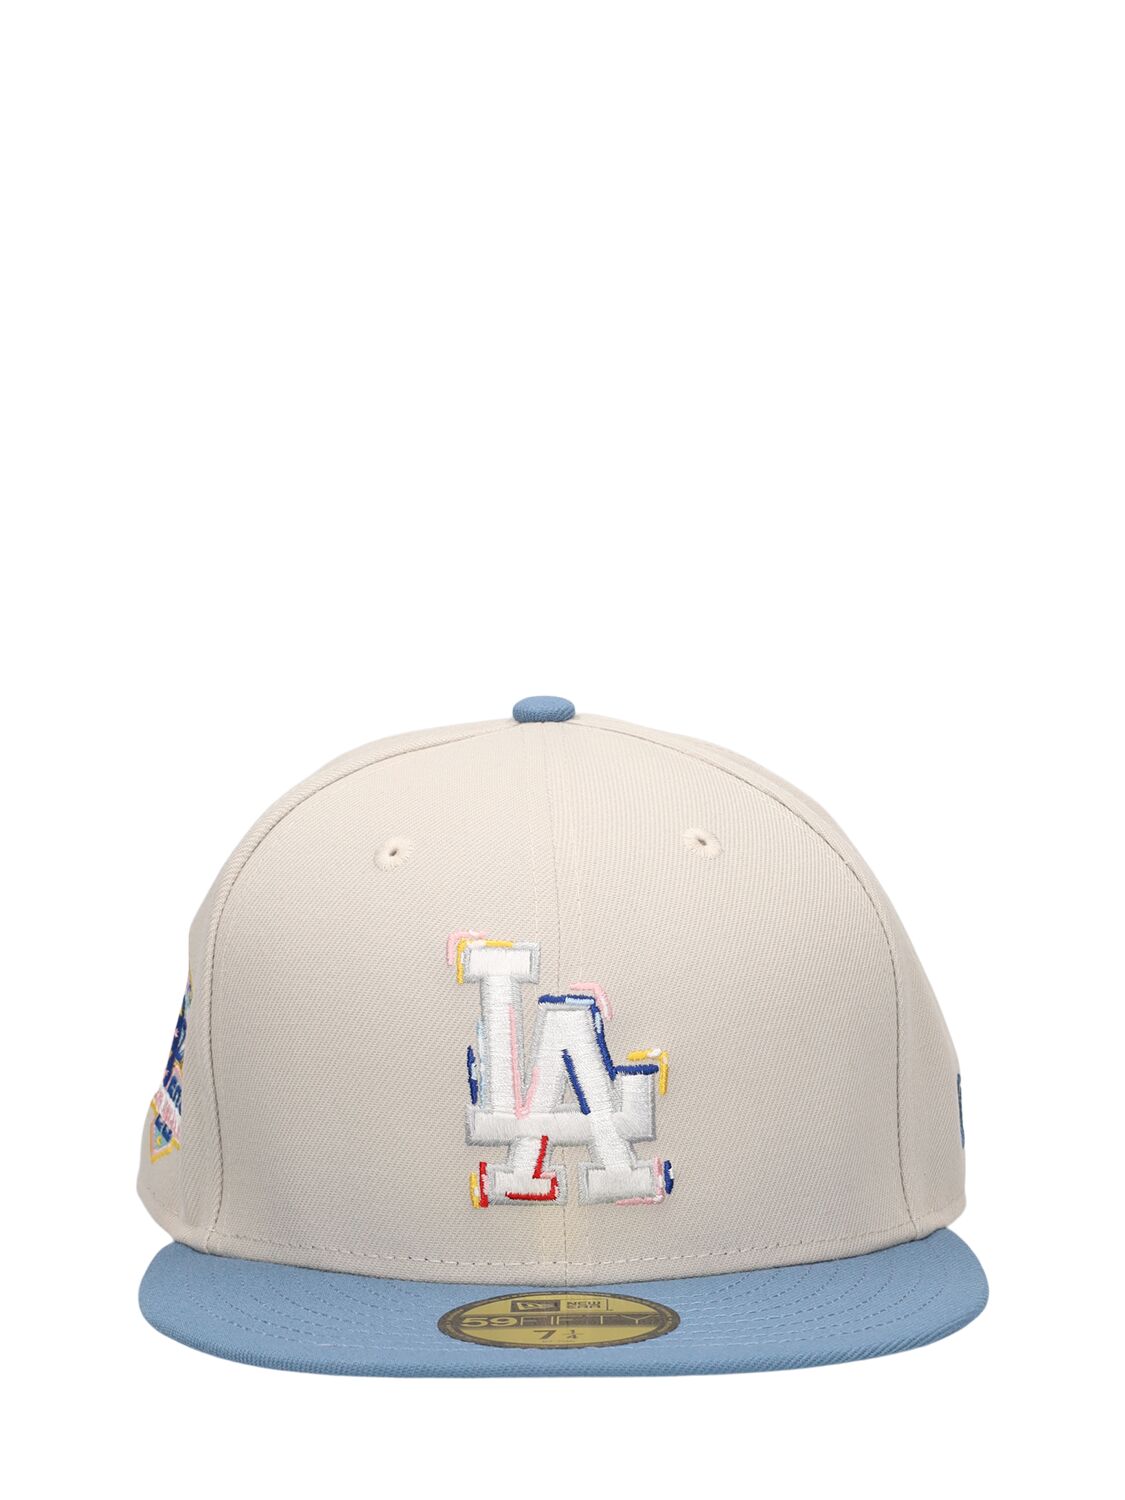 New Era Color Brush La Dodgers 59fifty棒球帽 In Color Brush